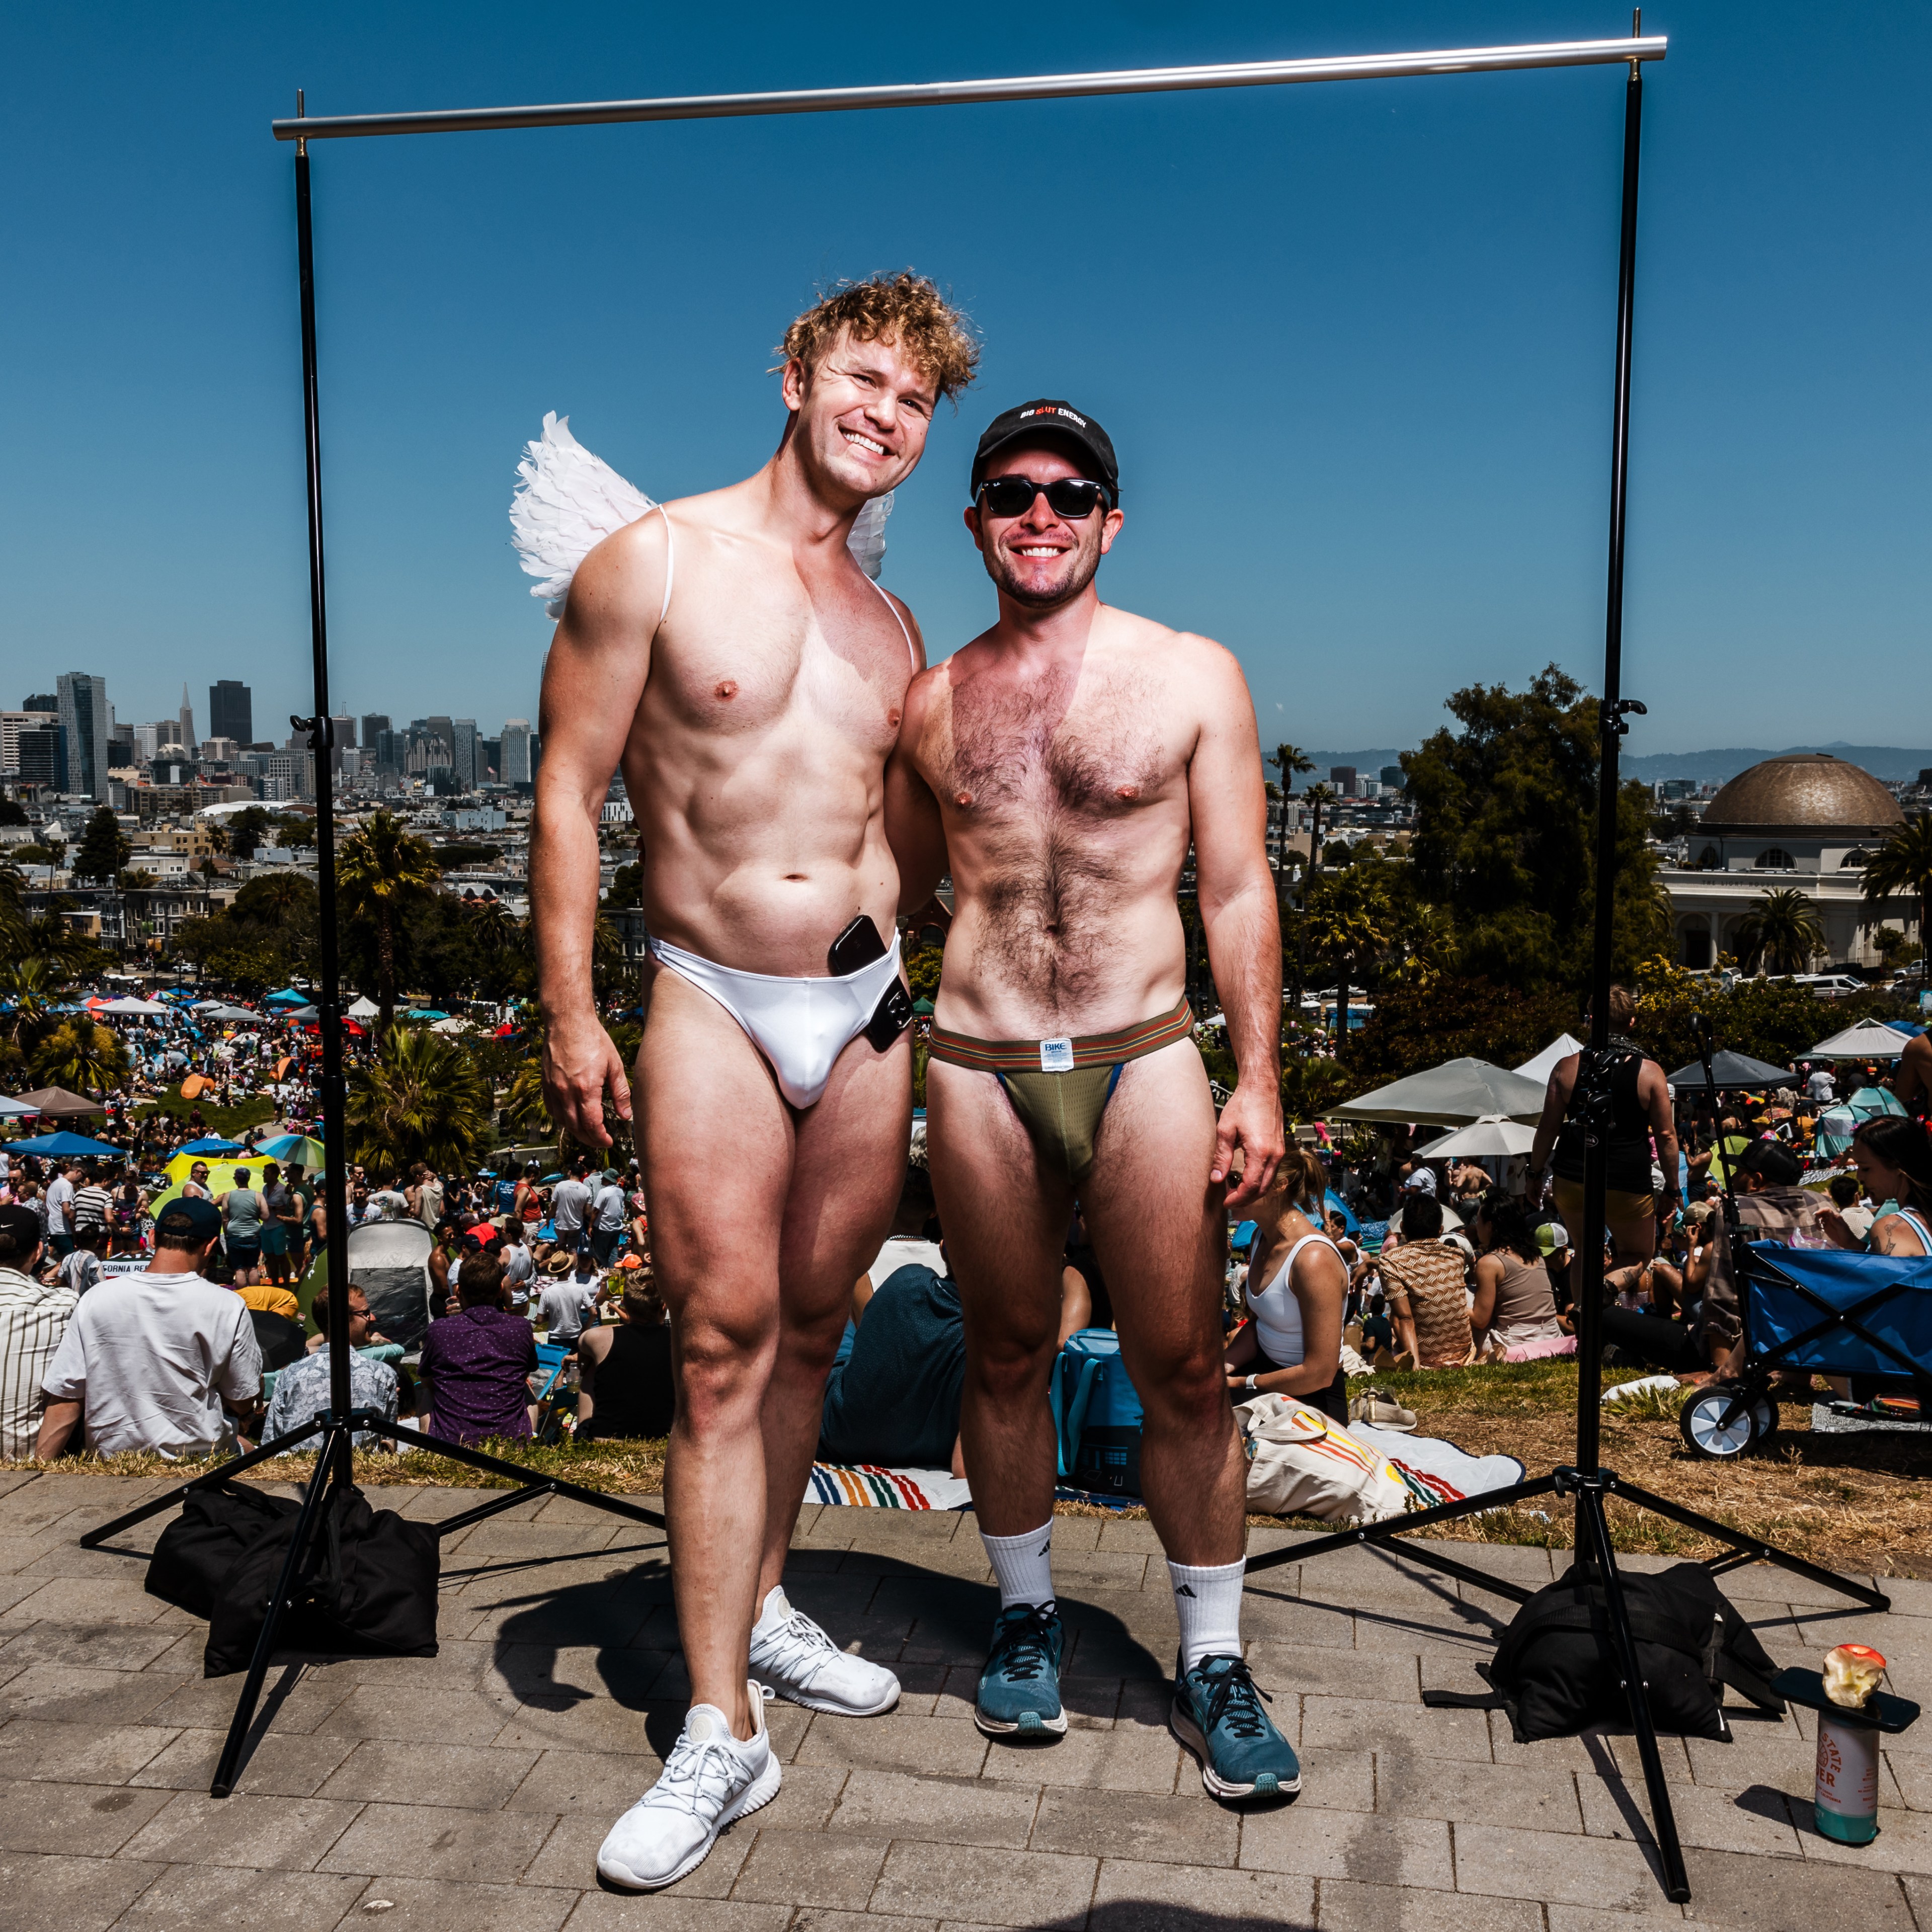 Two men in minimal swimwear stand smiling in front of a crowded outdoor park, framed by a metal stand, with a city skyline and blue sky in the background.